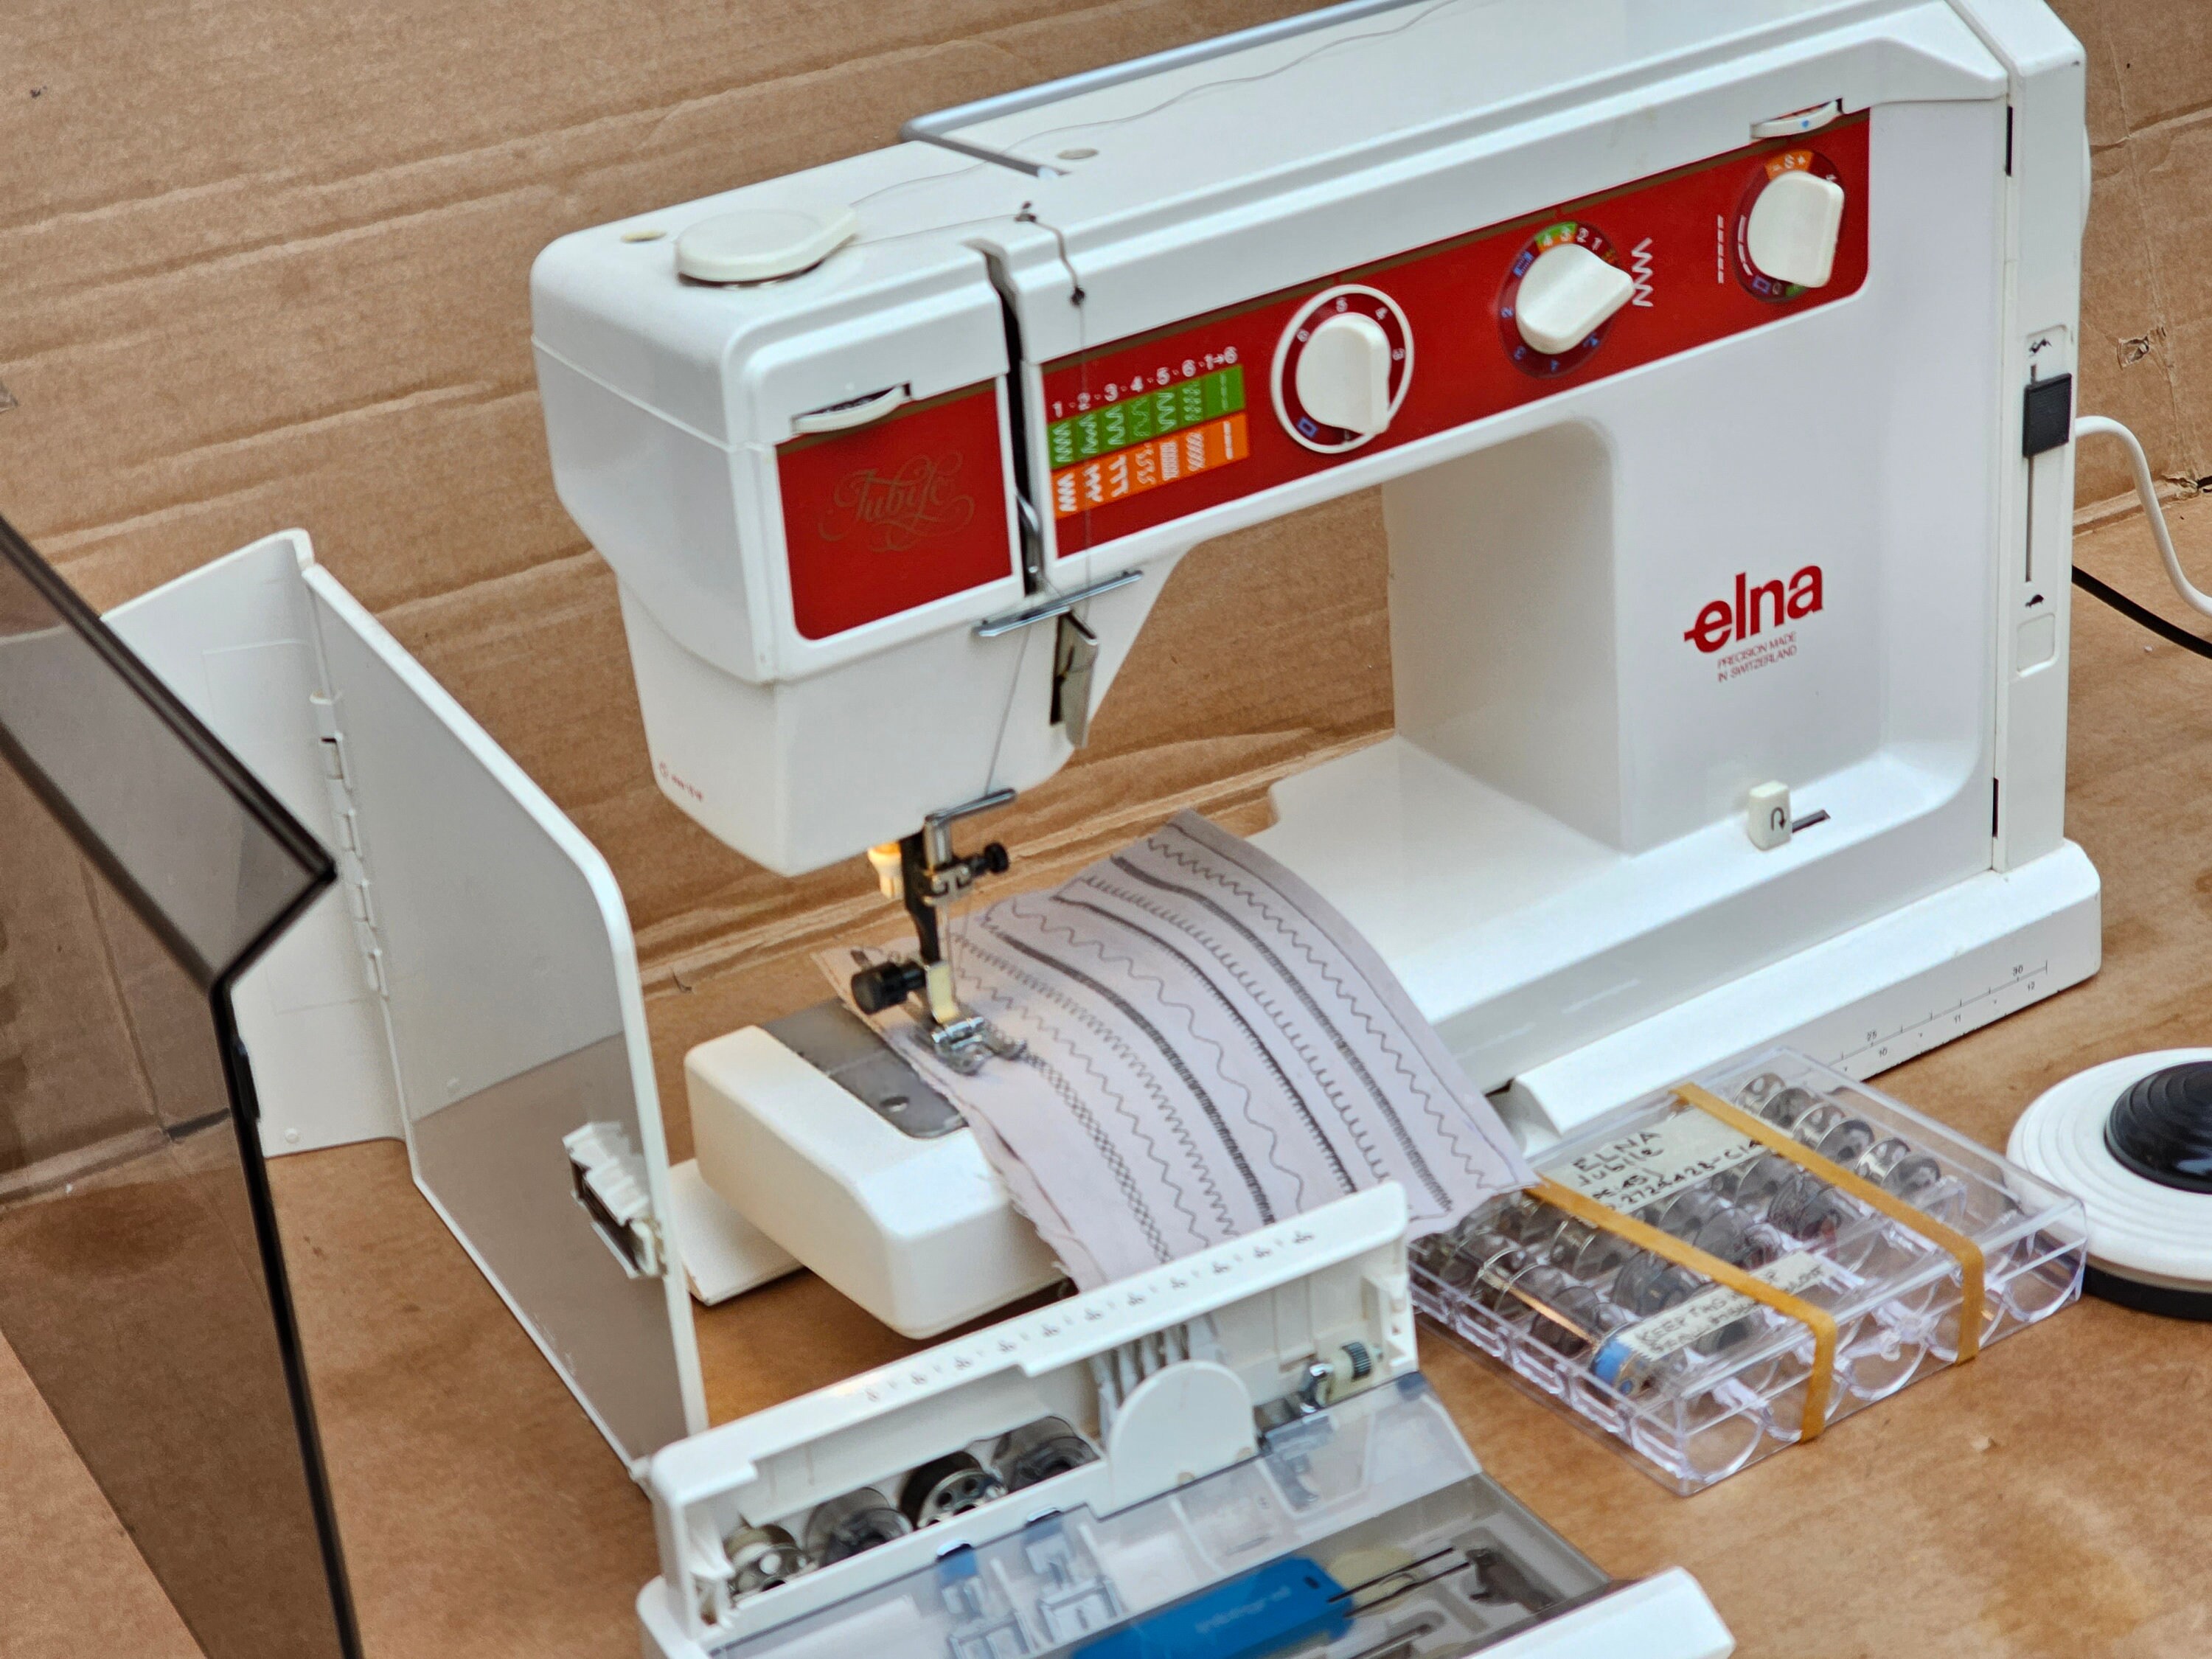 Elna Jubilee 45 Sewing Machine review by johnr55